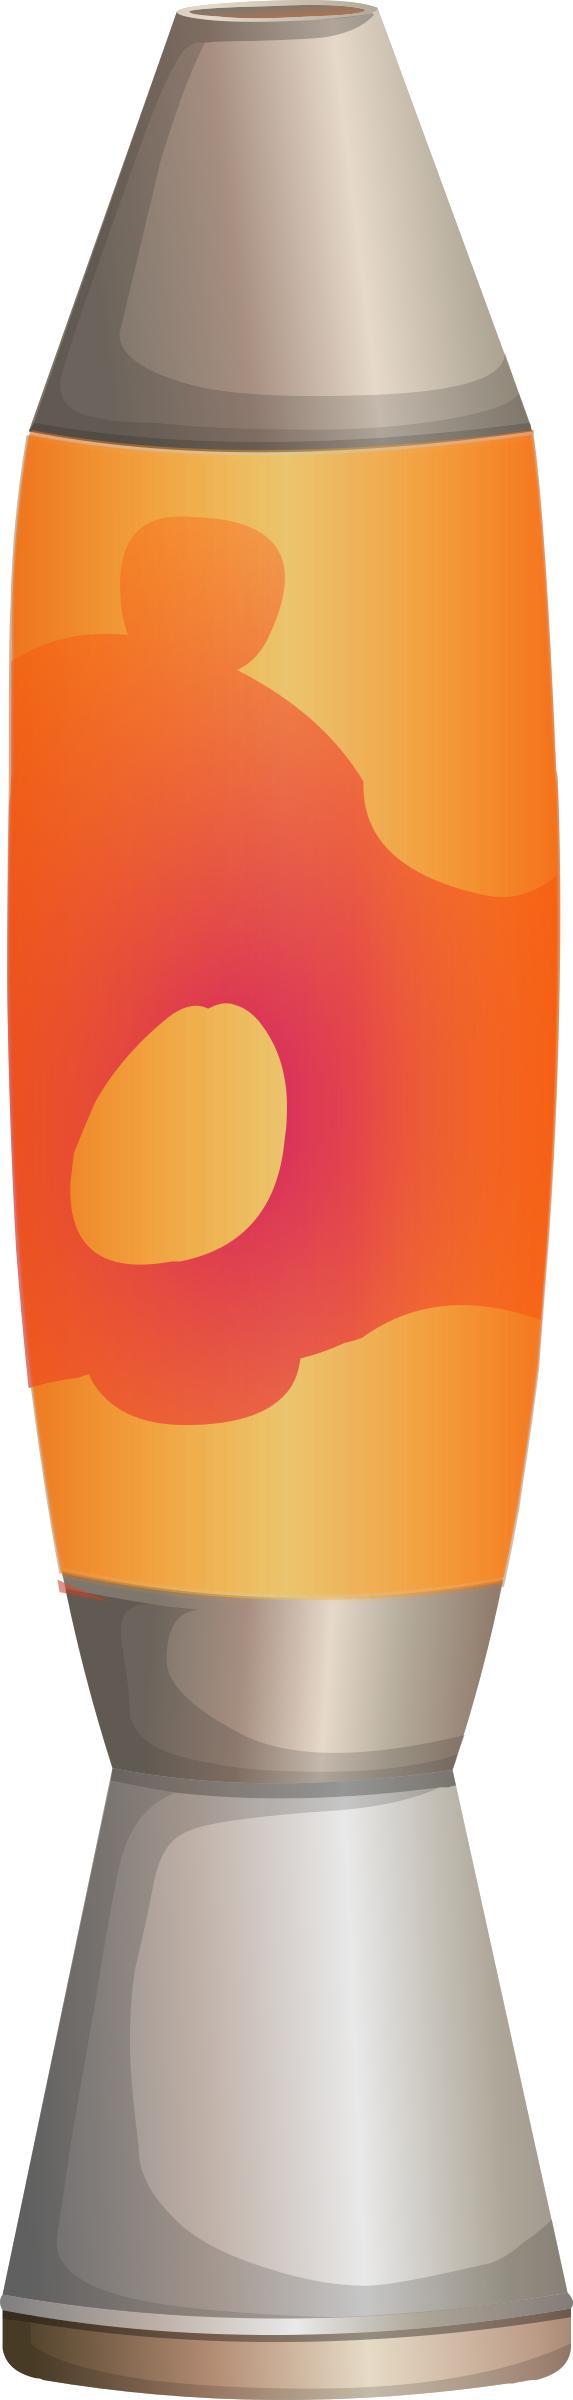 Lava lamp from Glitch png transparent